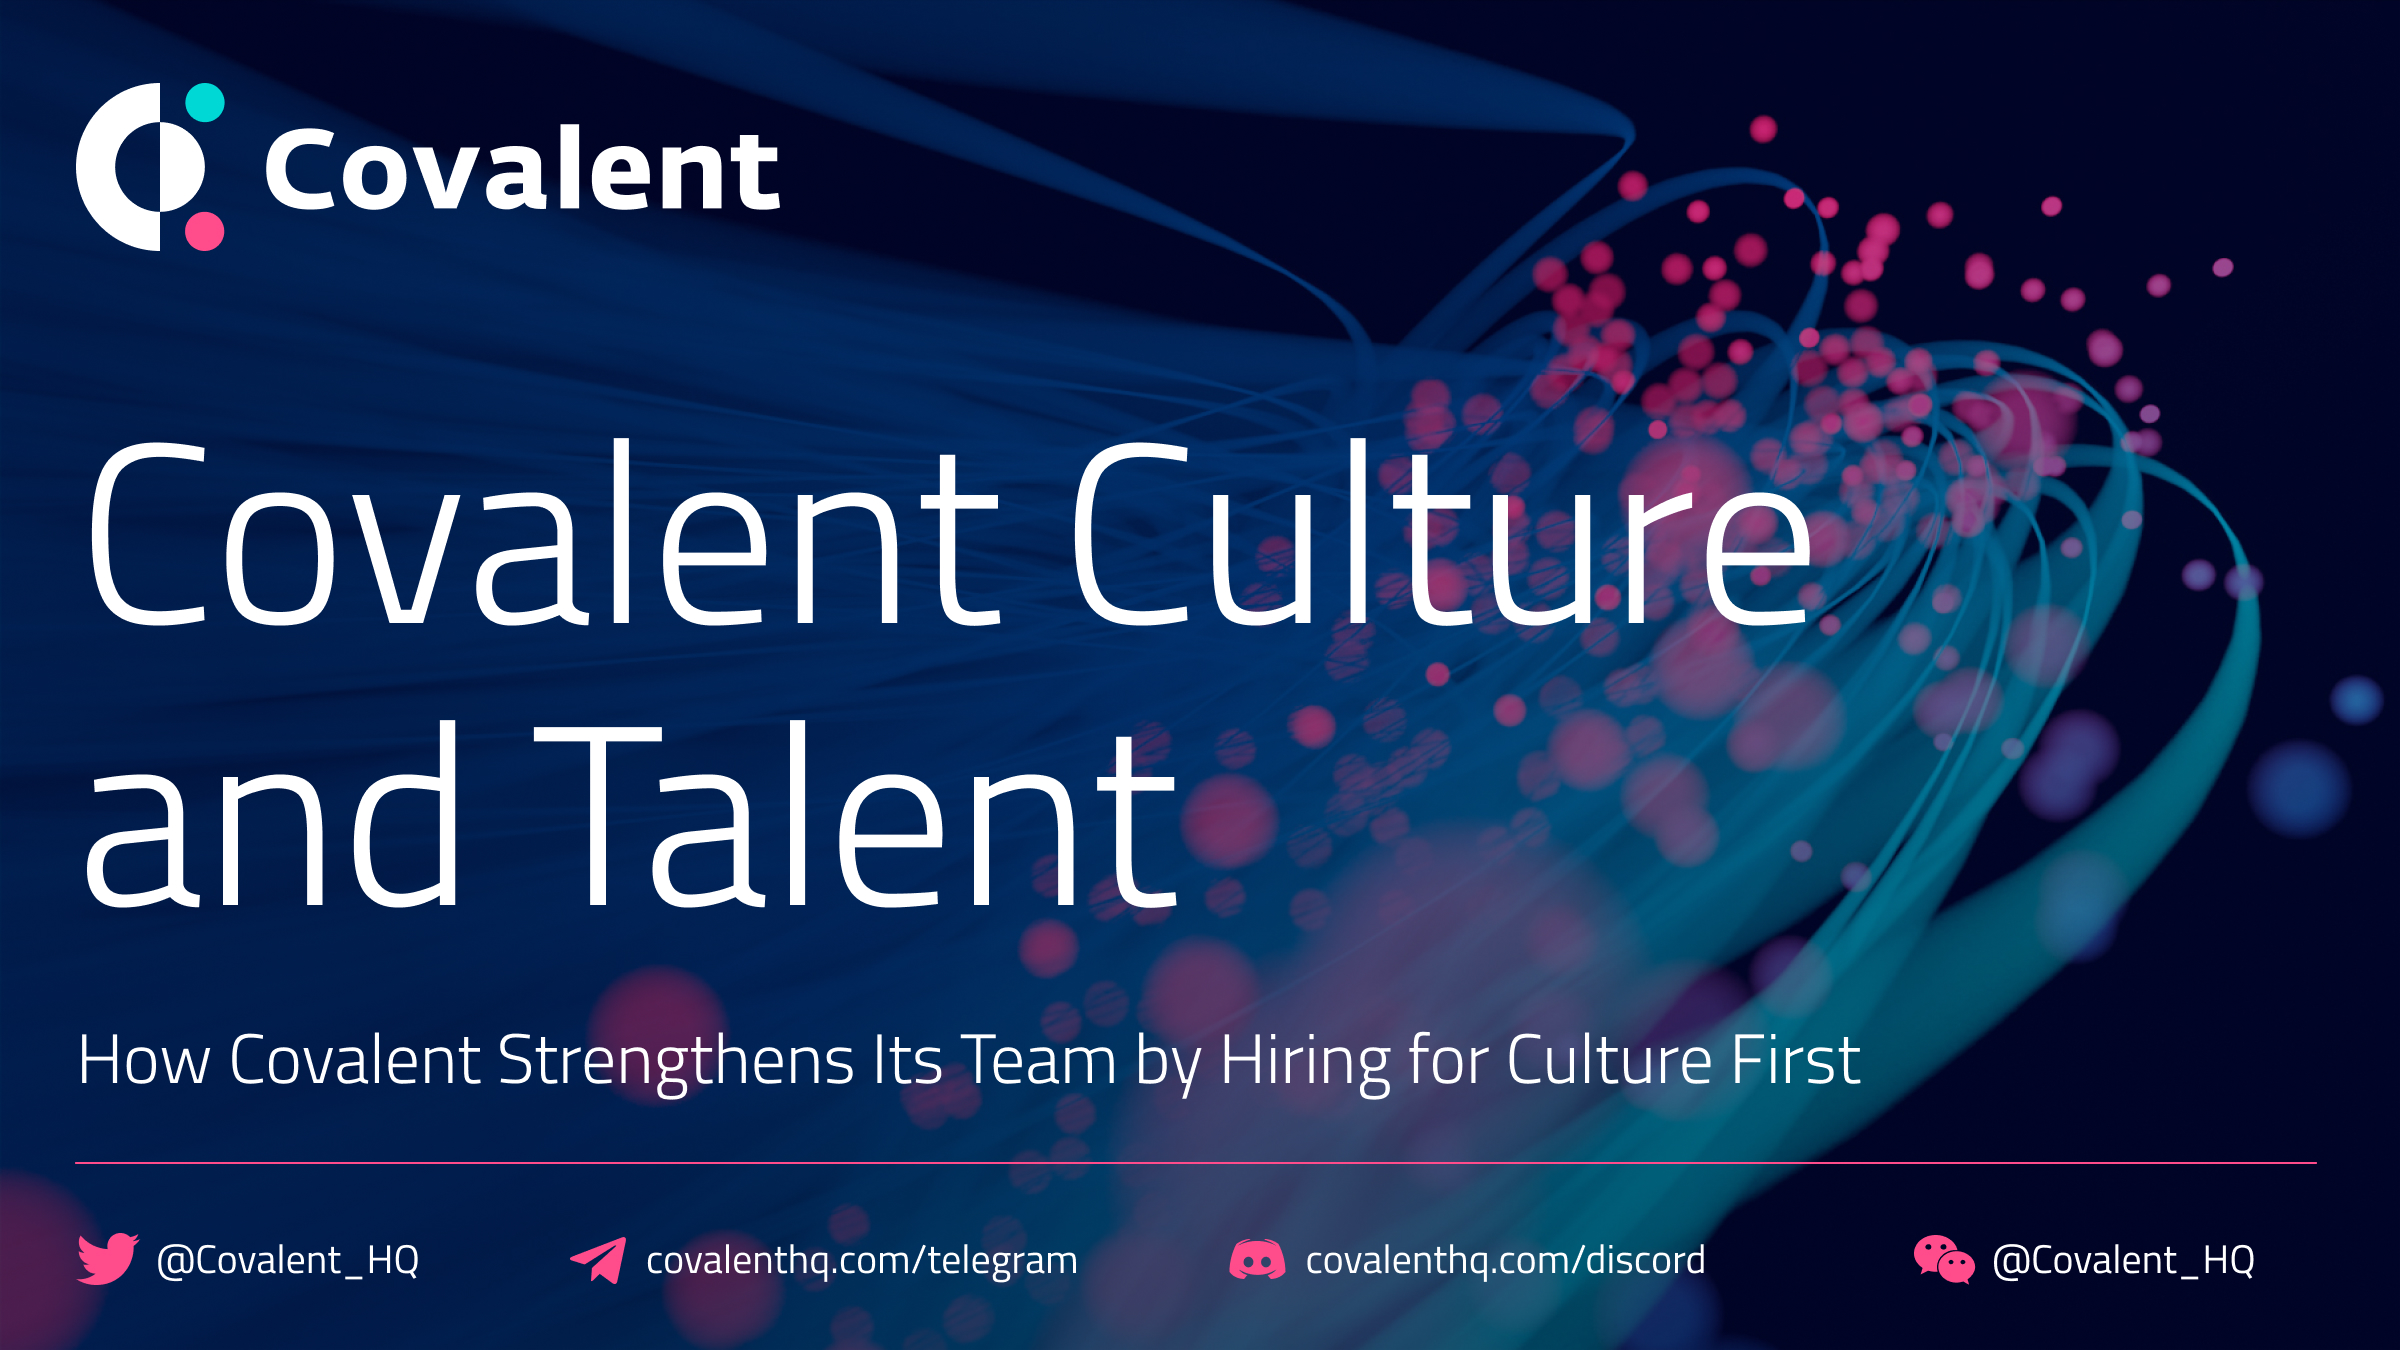 Hiring for Culture First Builds a Stronger Team